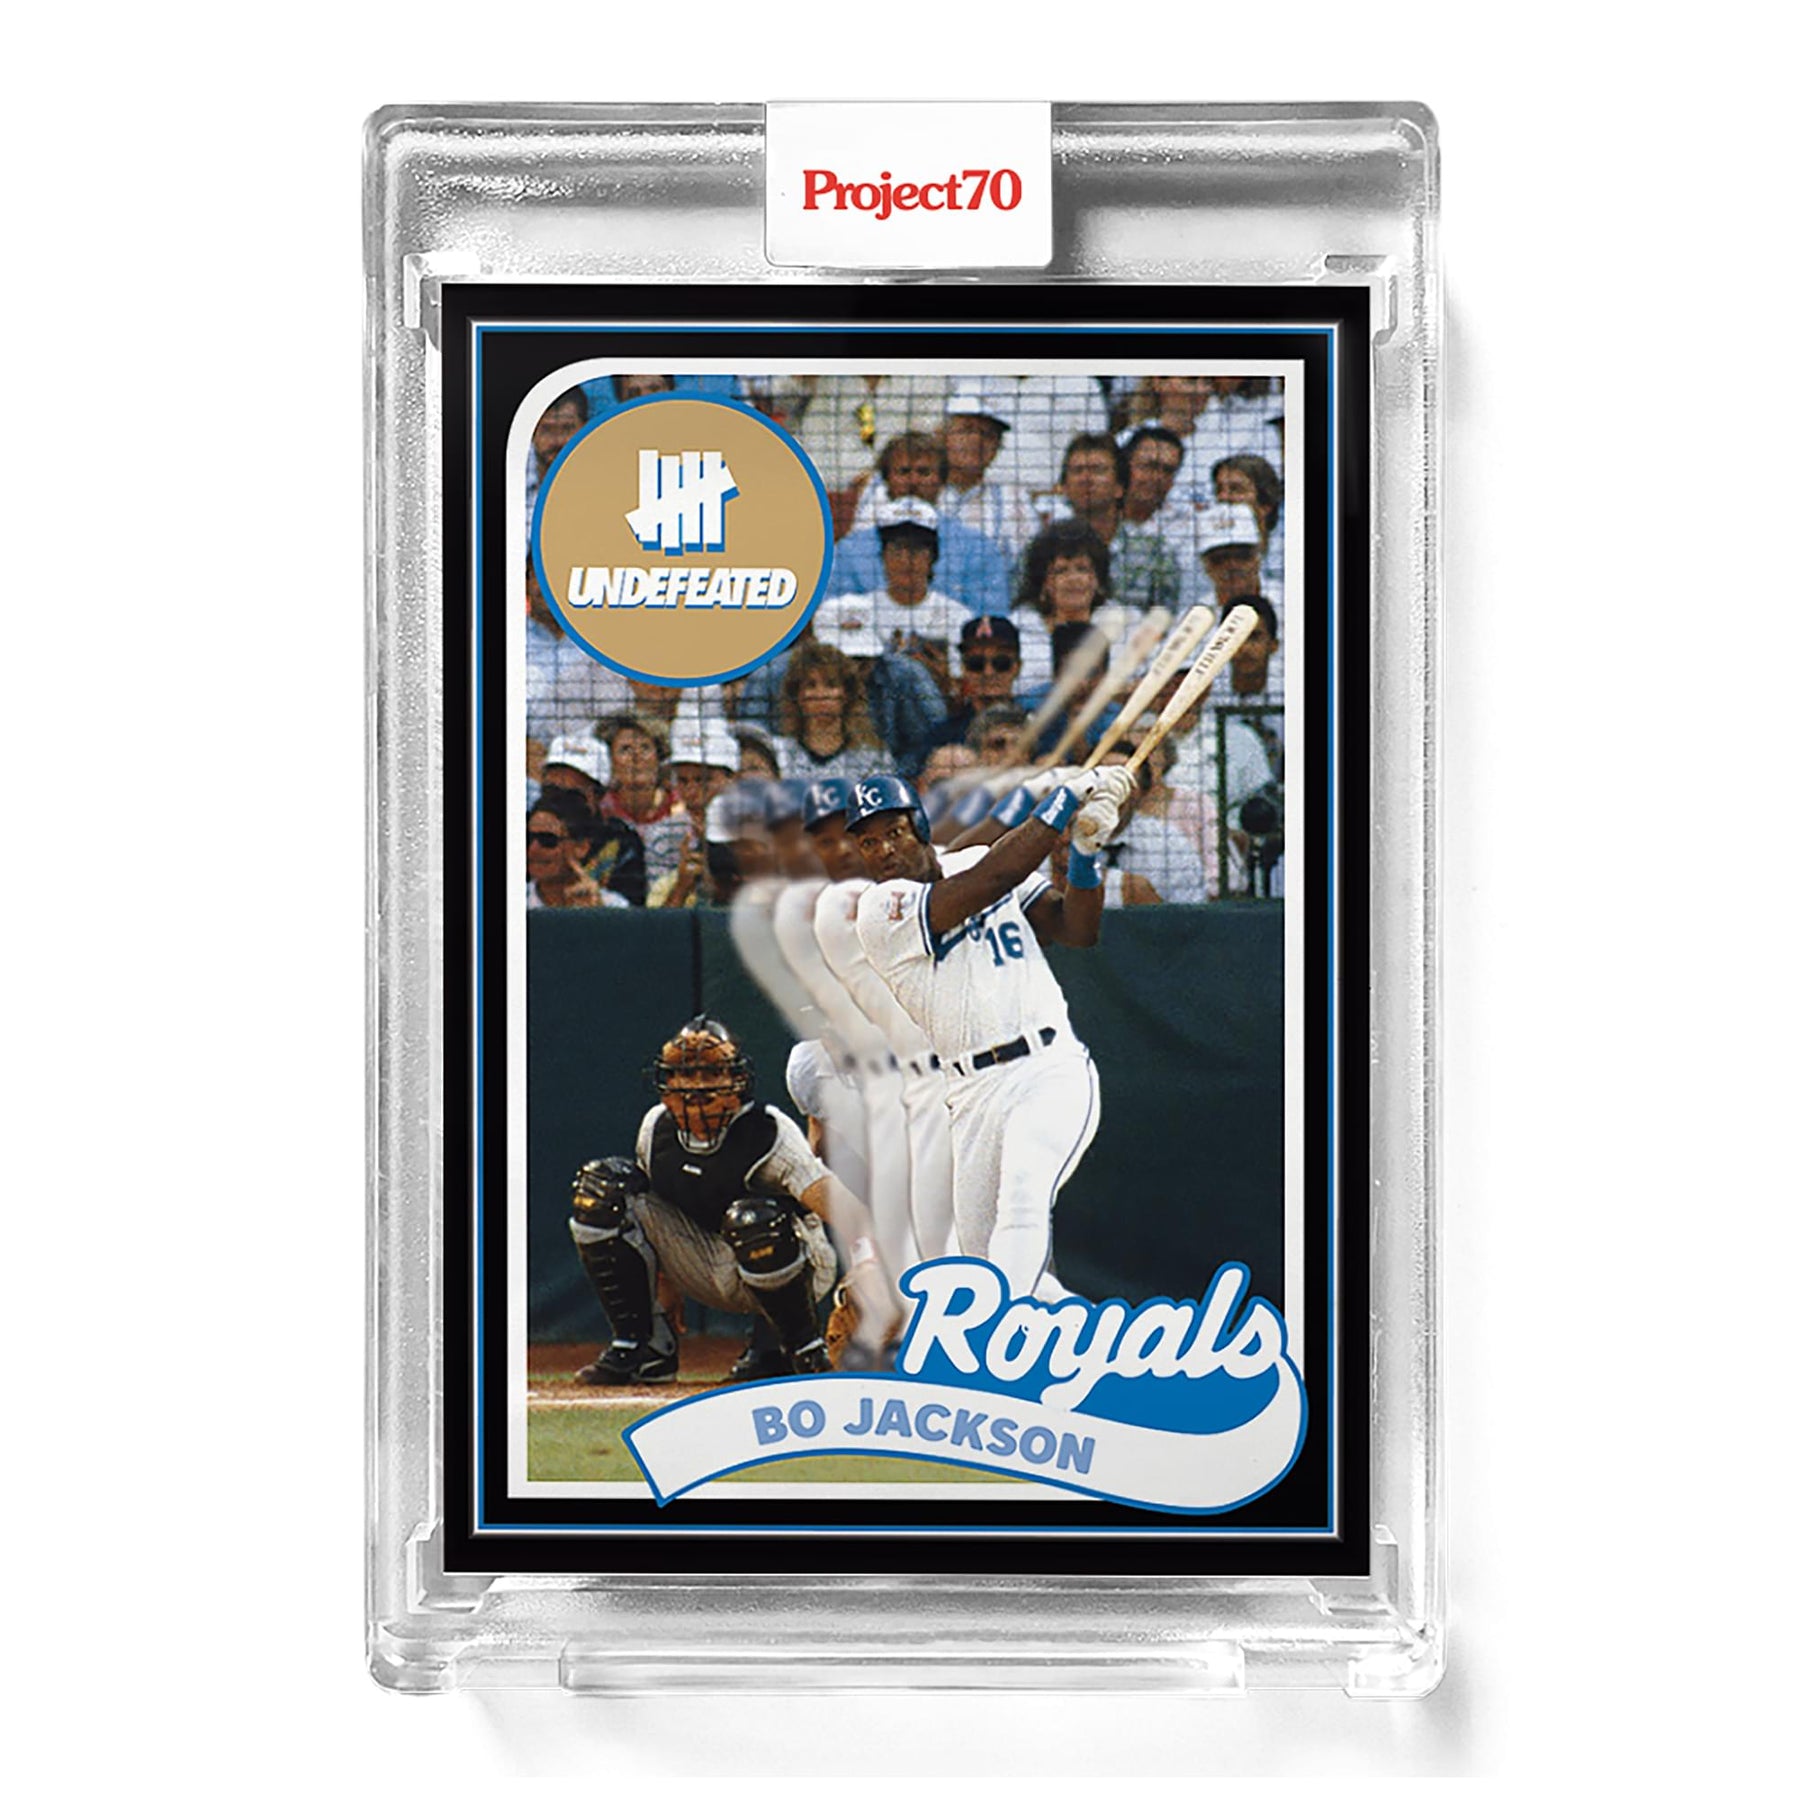 MLB Topps Project70 Card 337 | Bo Jackson by UNDEFEATED